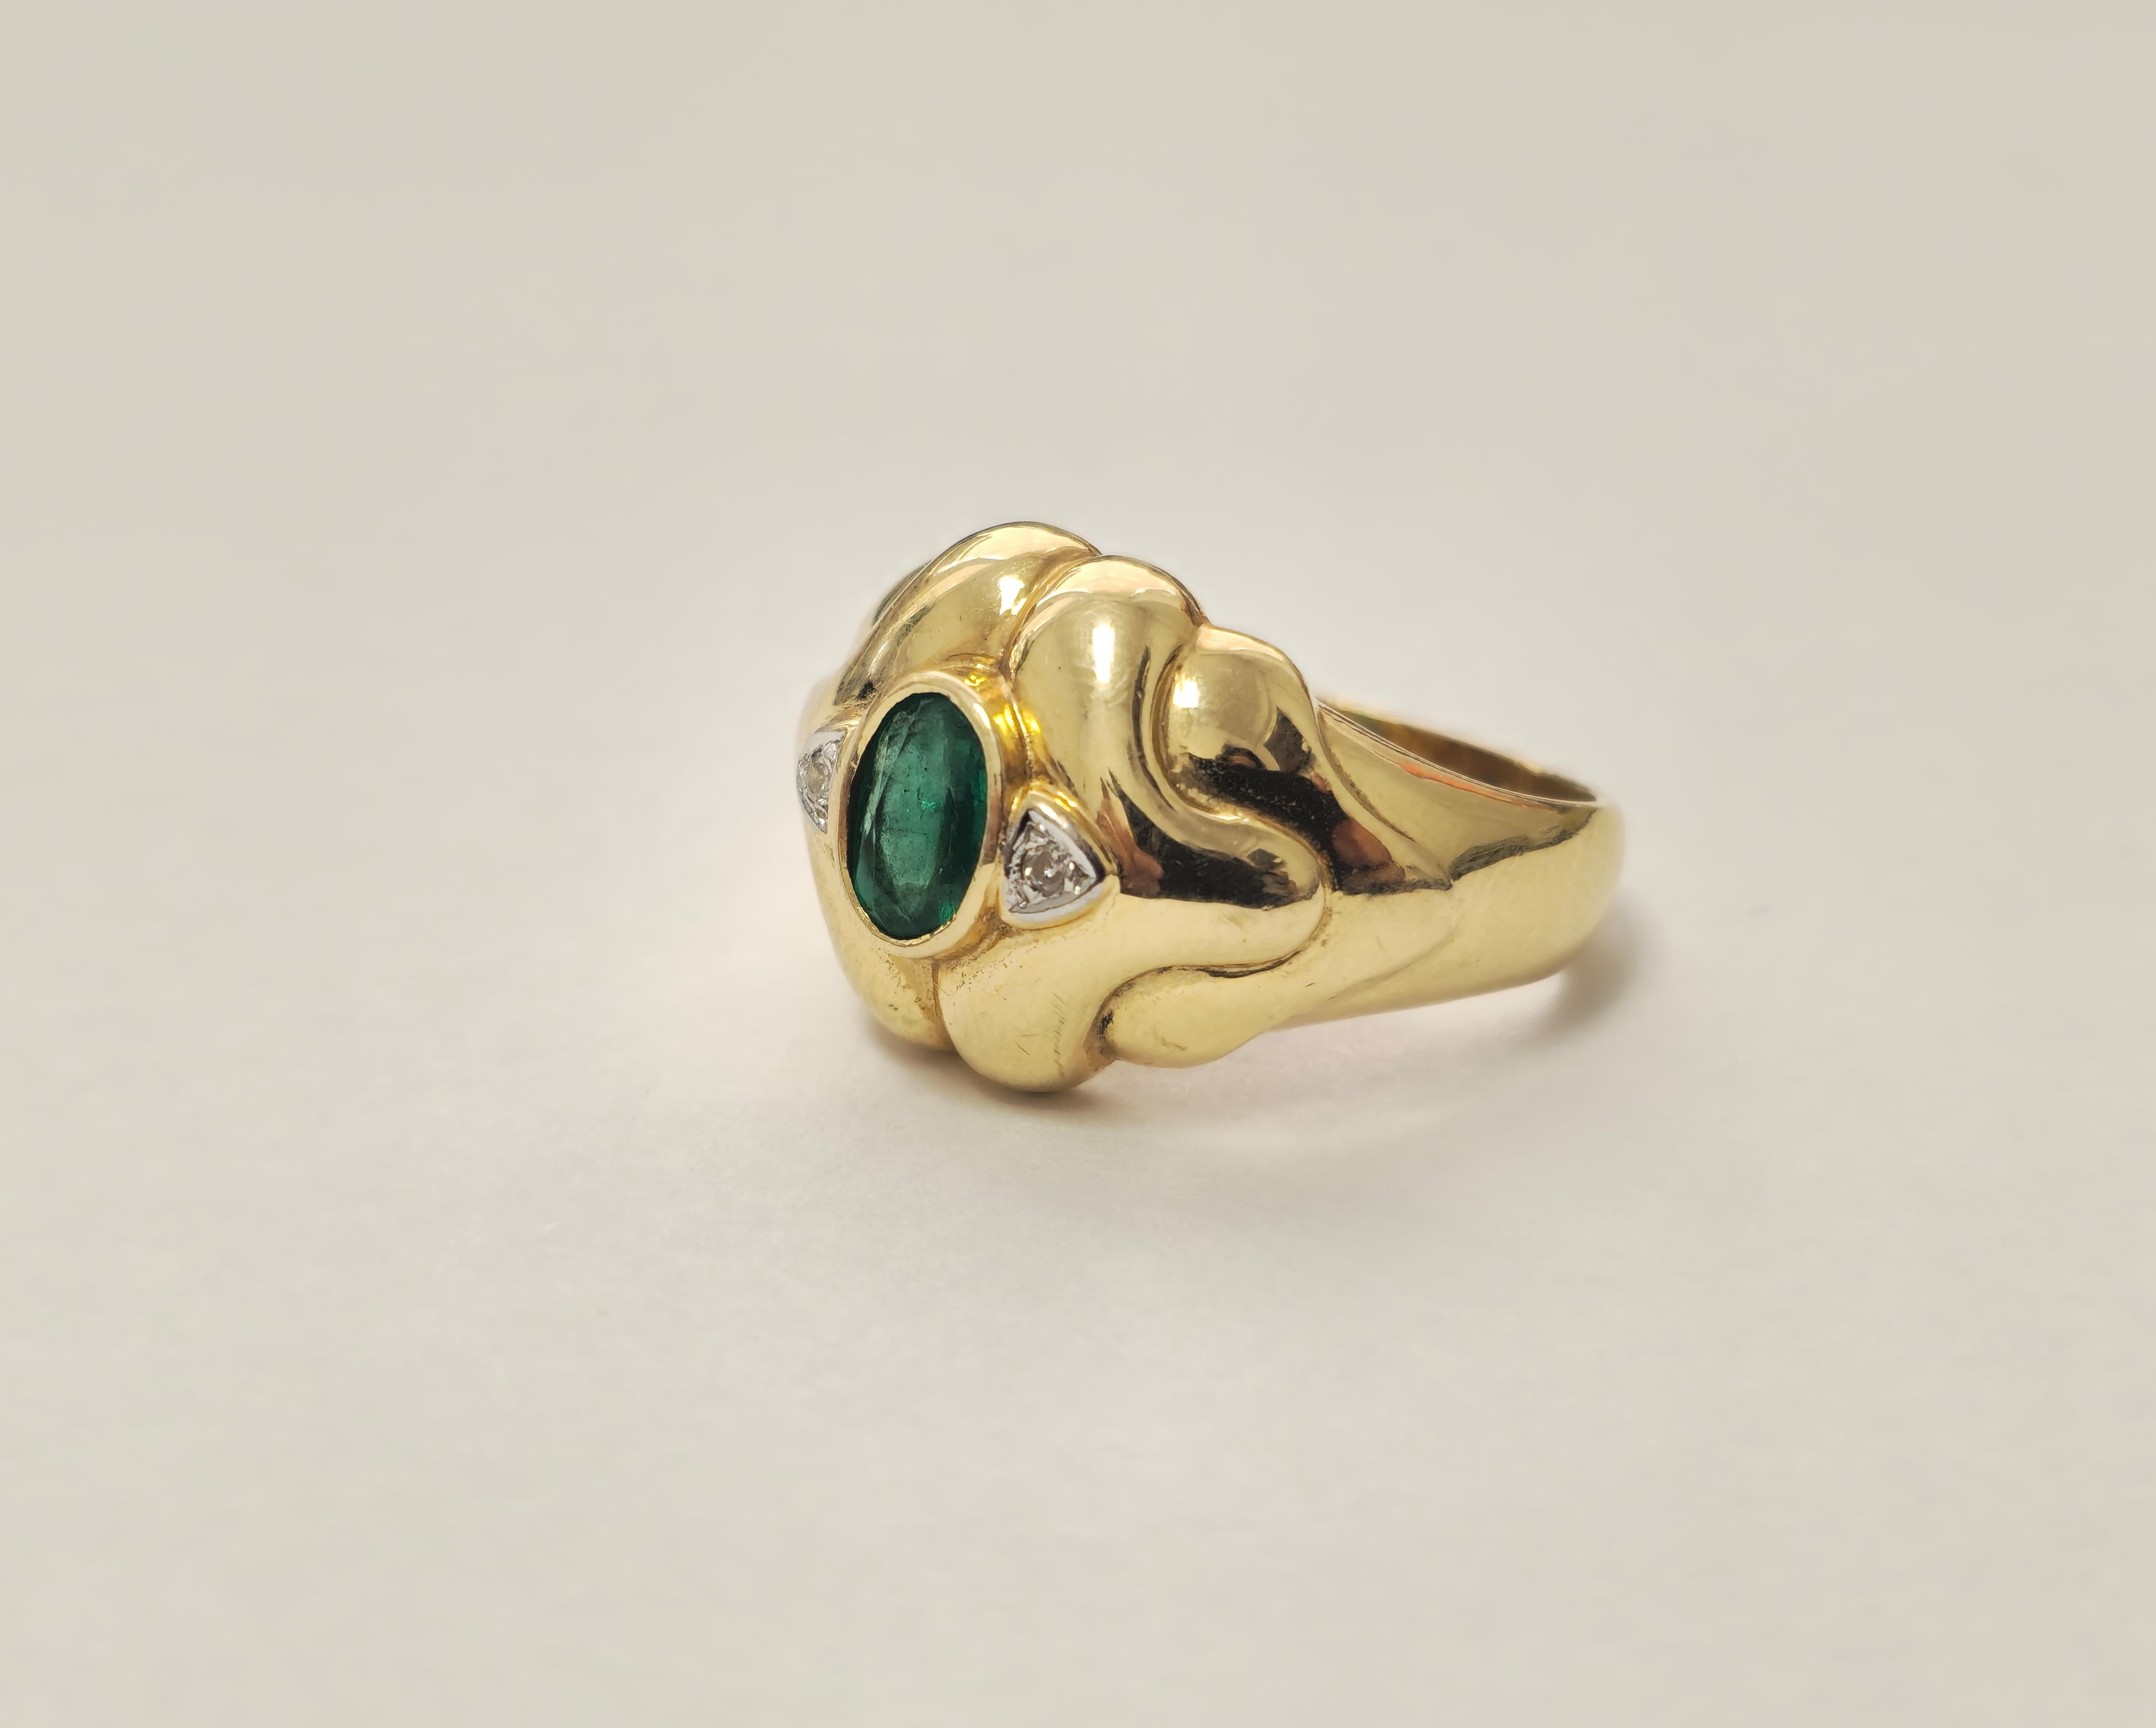 Experience timeless elegance with this vintage art deco style engagement ring. Crafted in luxurious 18k yellow gold, it showcases a stunning 1.50 carat round emerald in delicate prong setting, highlighting its natural earth-mined beauty. Surrounding